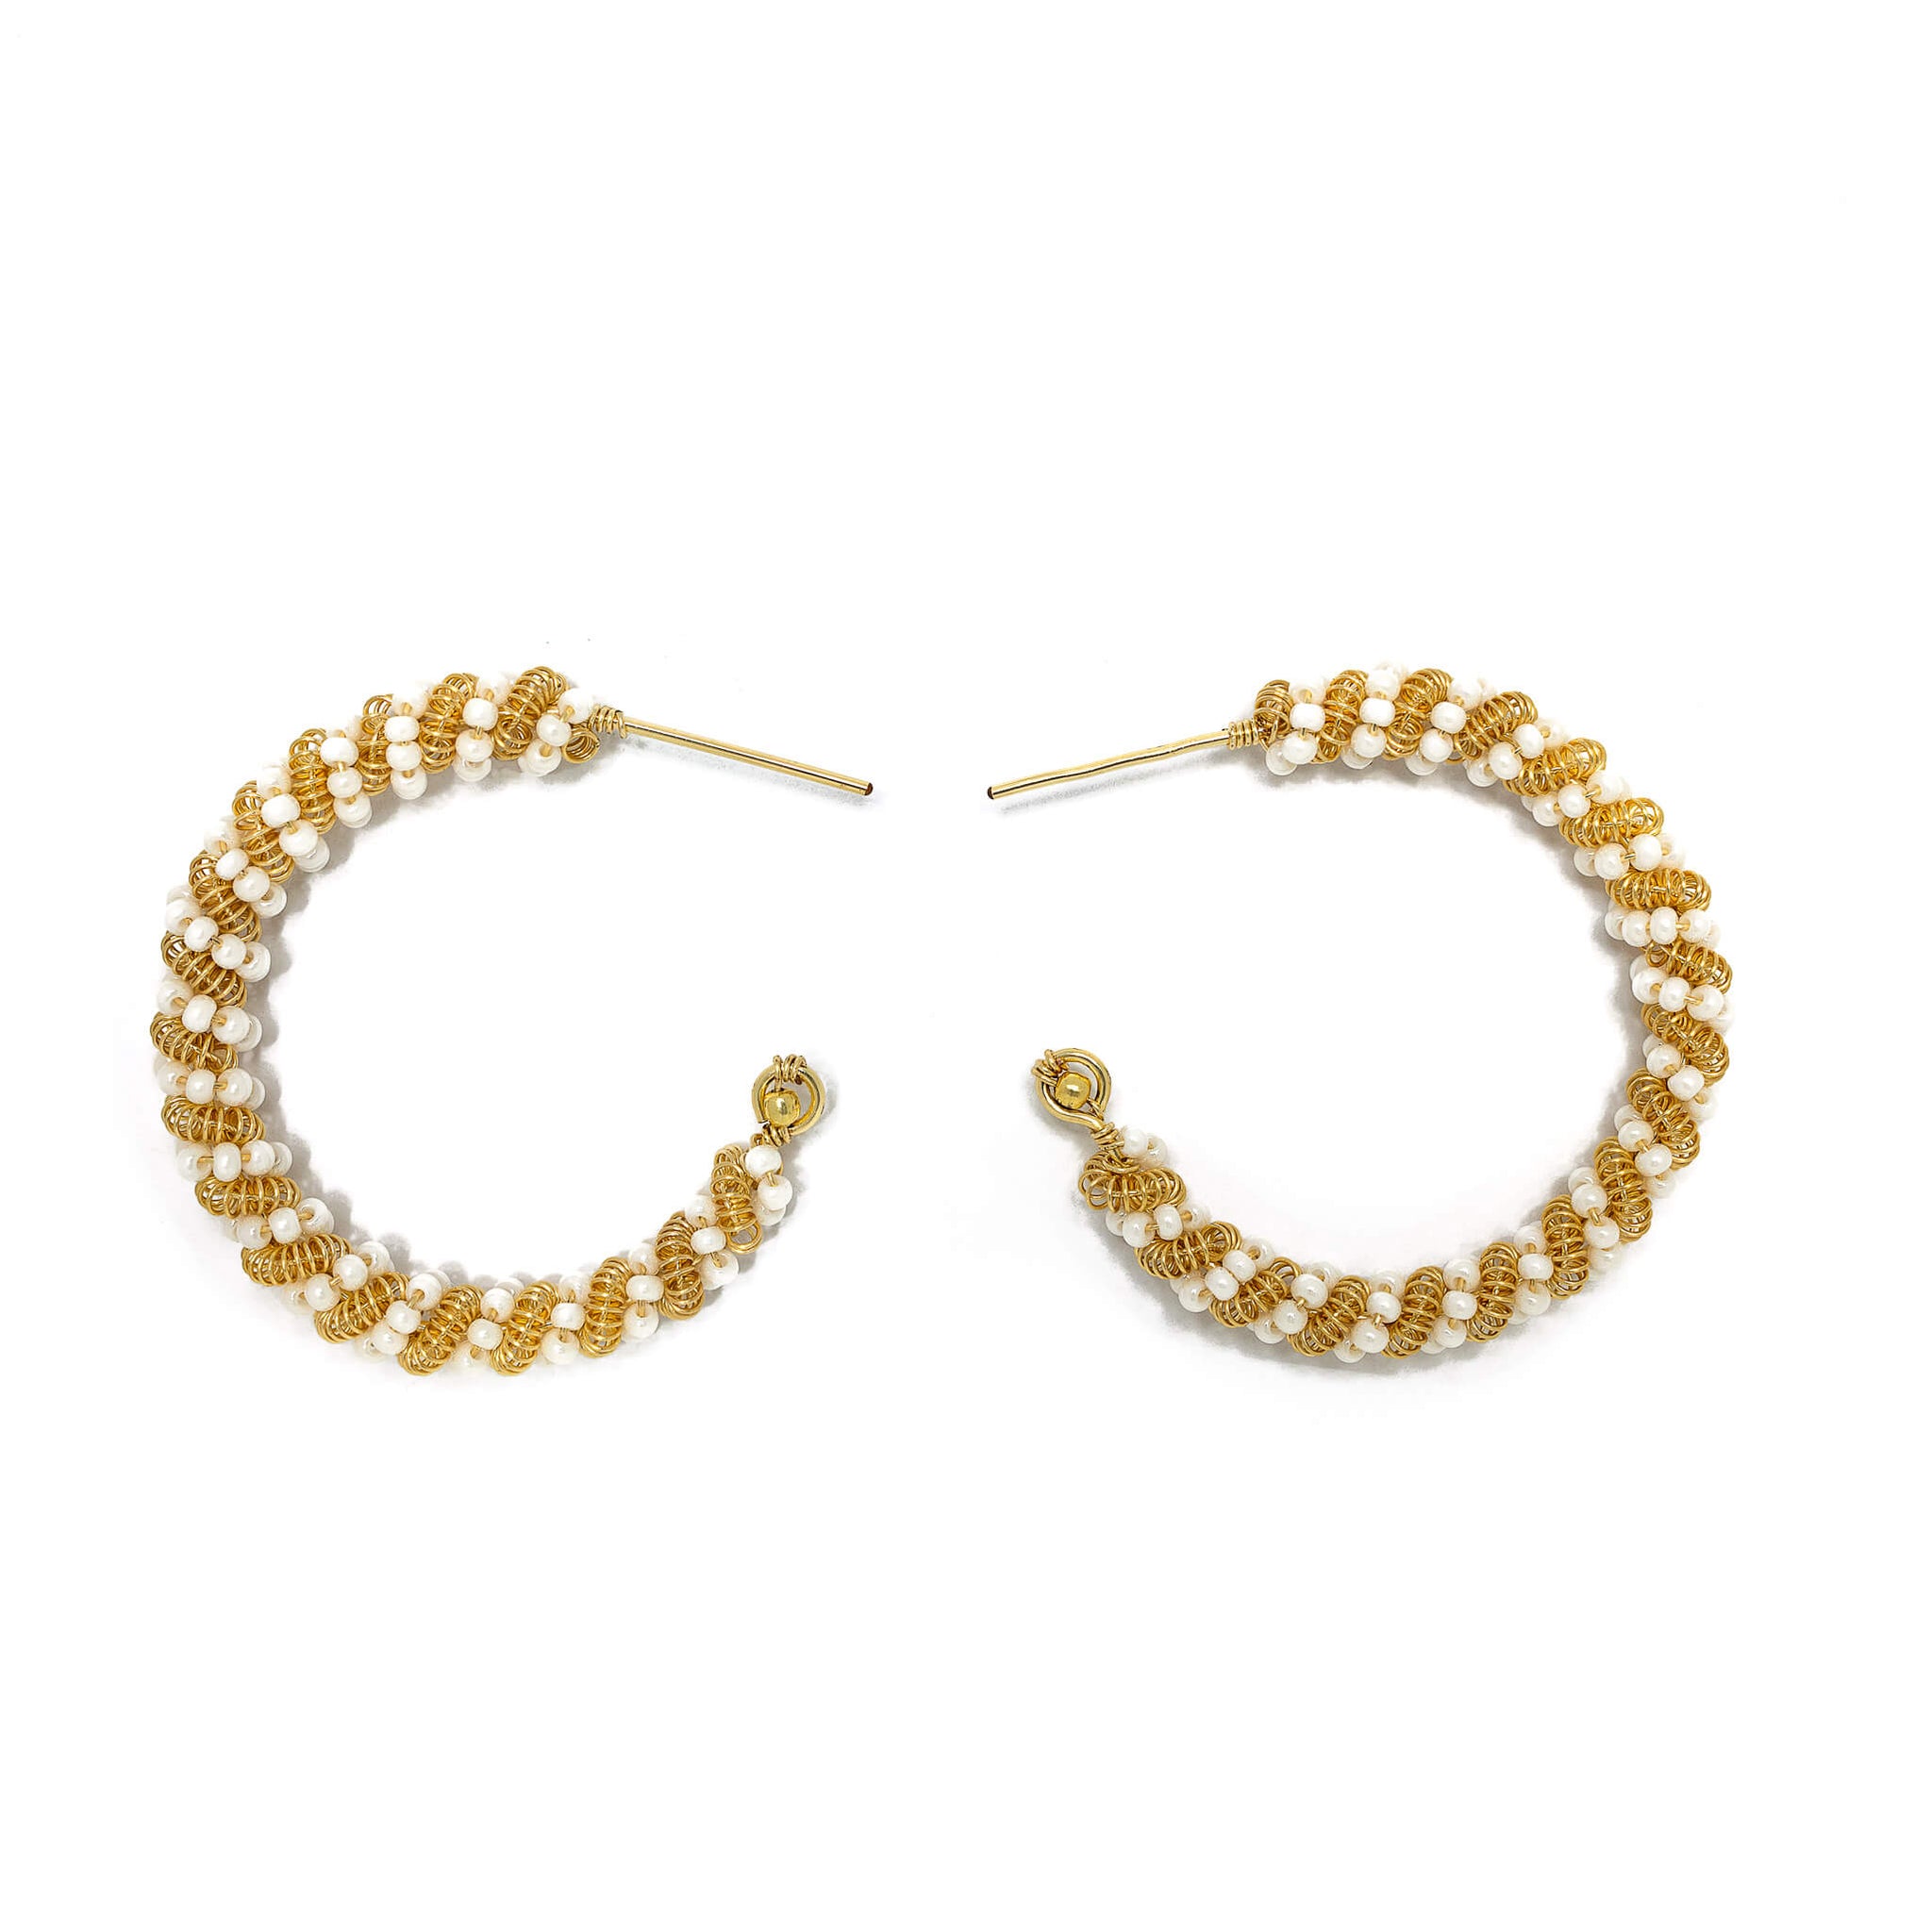 The Milan Hoop Earrings are 1.5 inches long. Minimalist Gold and white earrings. Wire Wrapped Earrings. Handmade Gold beaded earrings. Feature gold-plated wire and Czech seed bead crystals. Wire earrings.